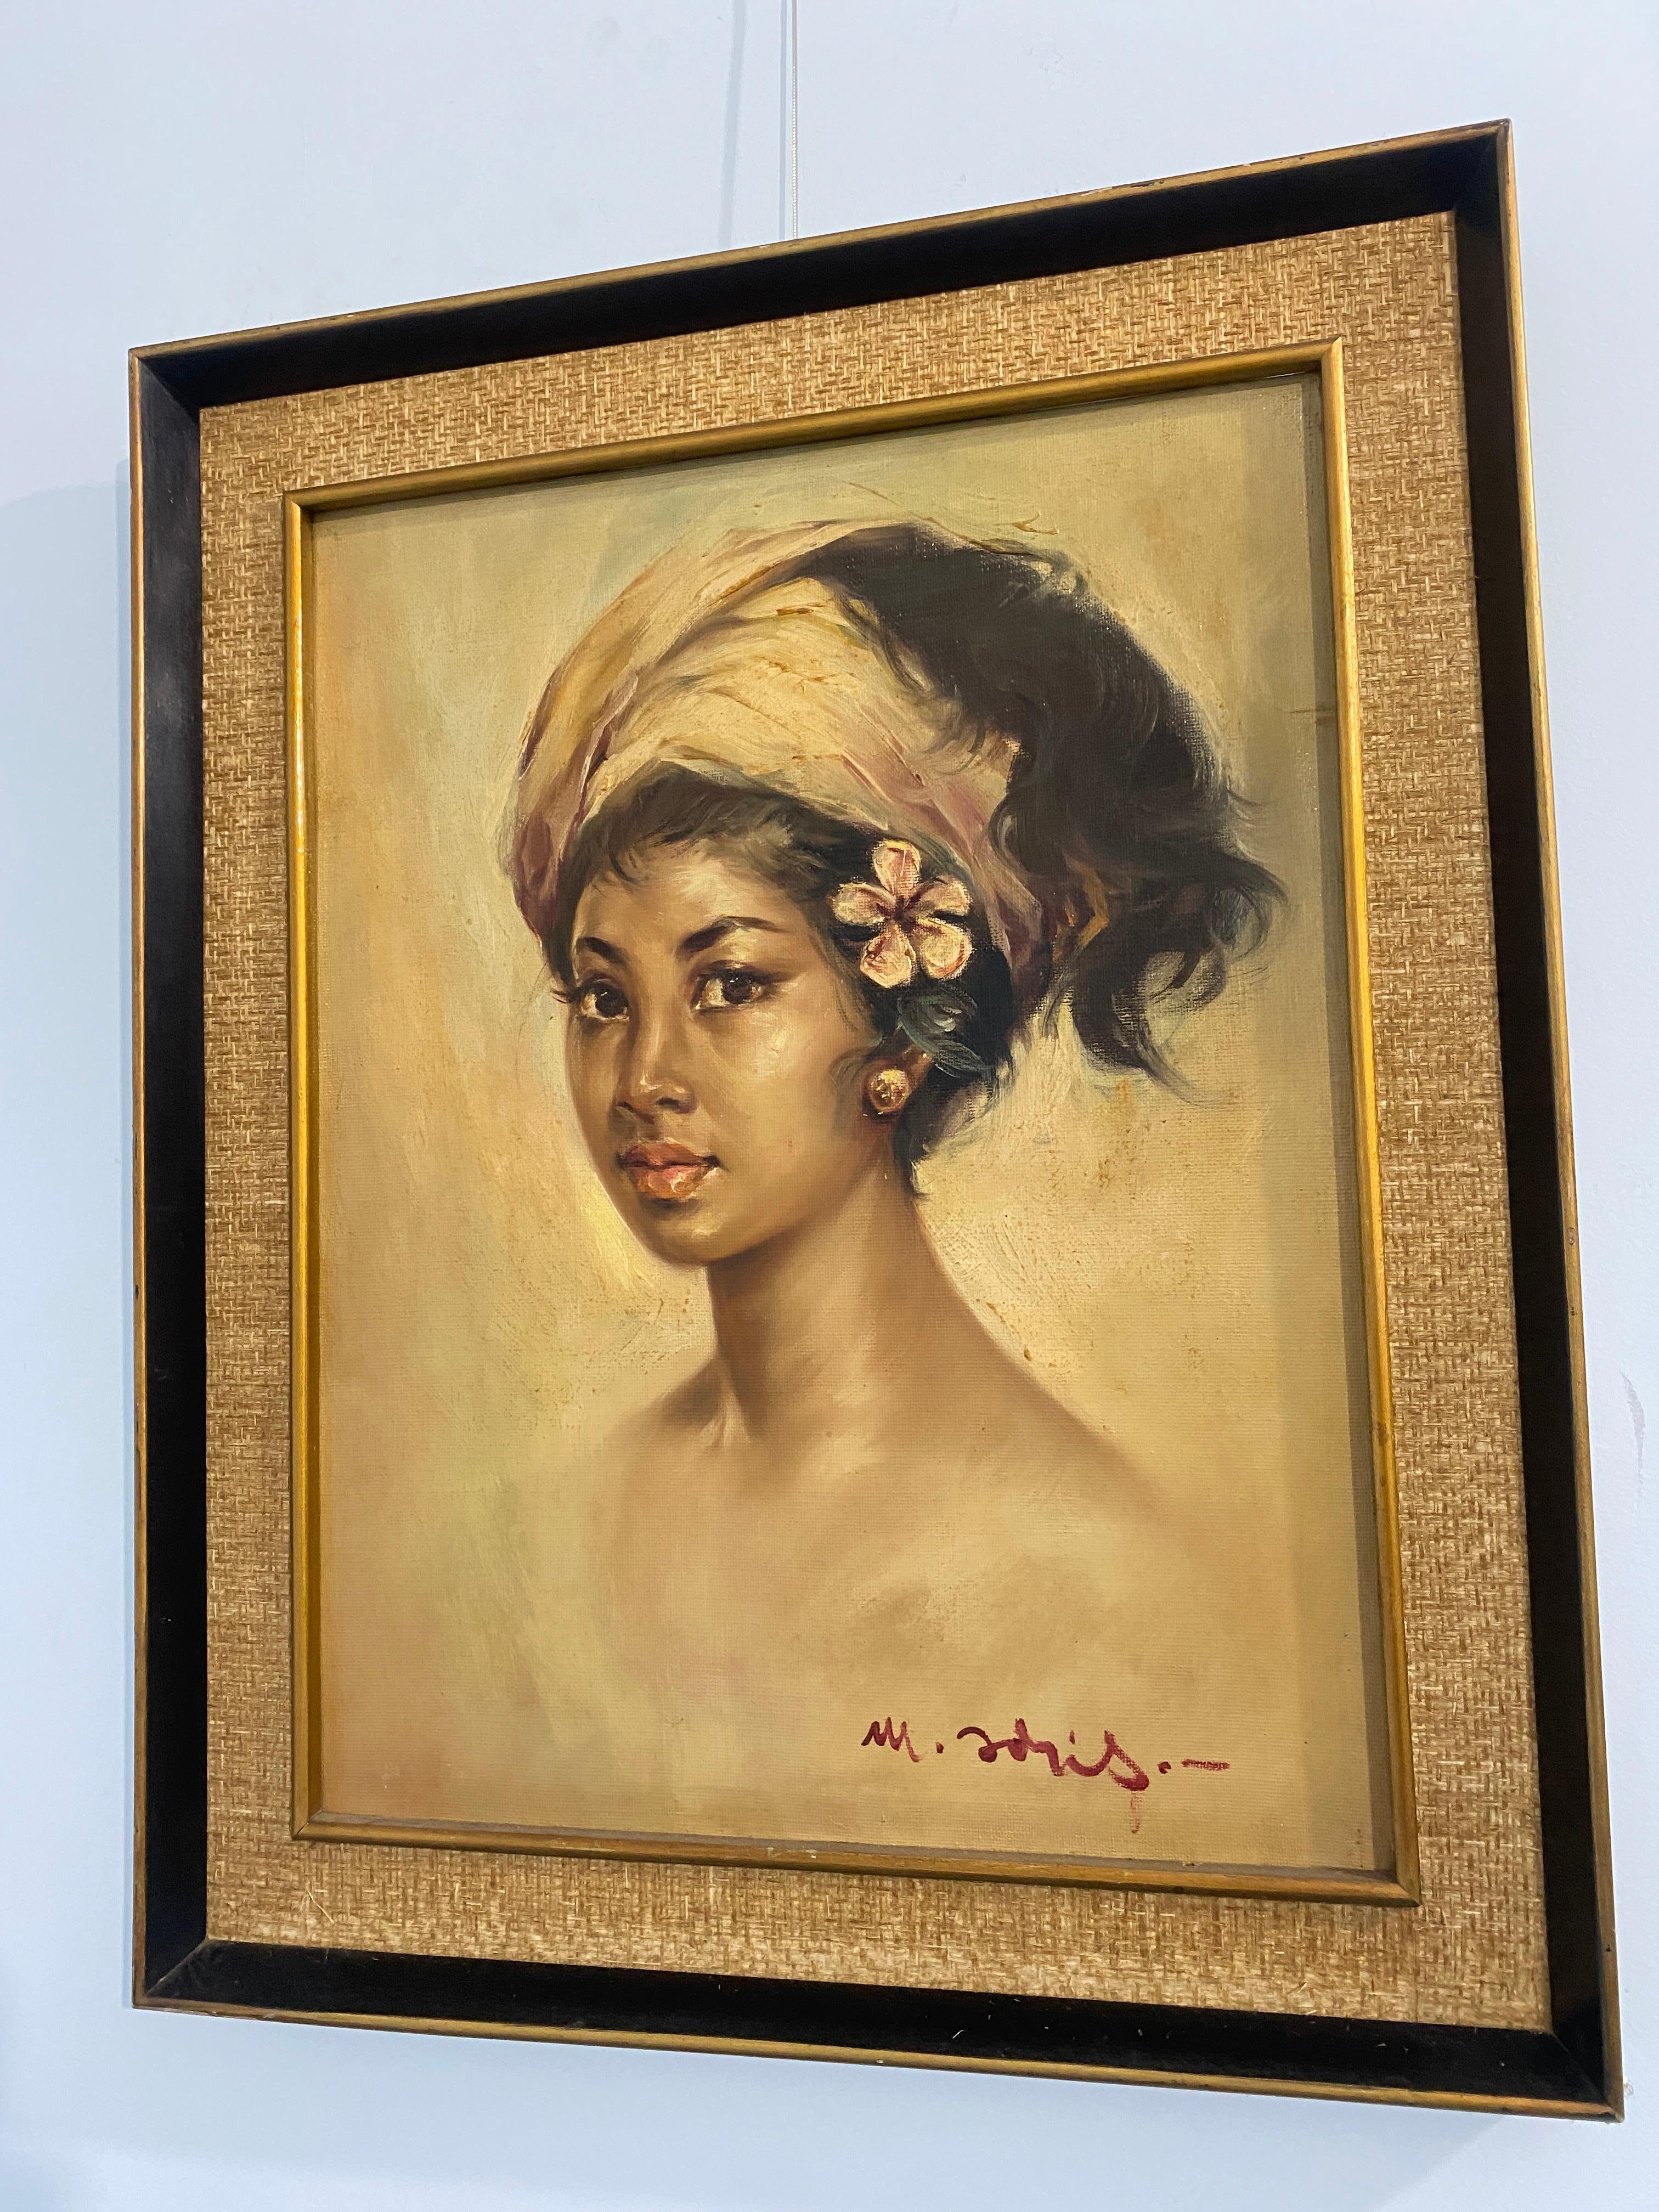 Pleasing French oil painting from the 1950s depicting a young Creole girl,signed at lower right.The author demonstrates good executional skill in depicting facial details, managing to create a beautiful exotic vision that is also captured in the